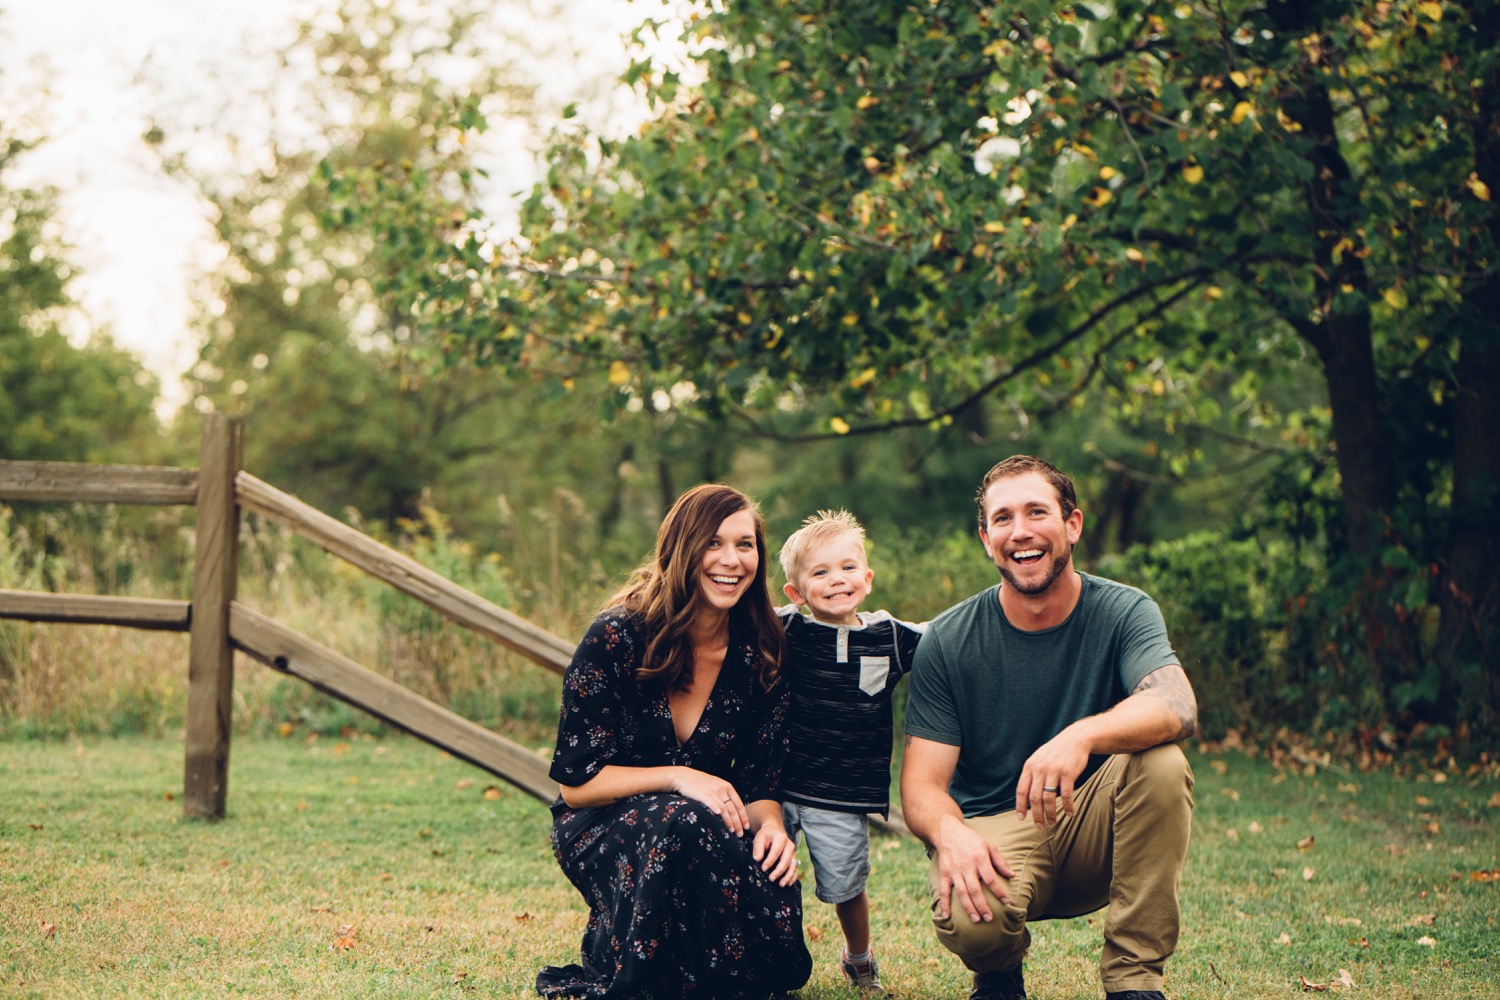 Family of 3 playing during central minnesota family portrait session